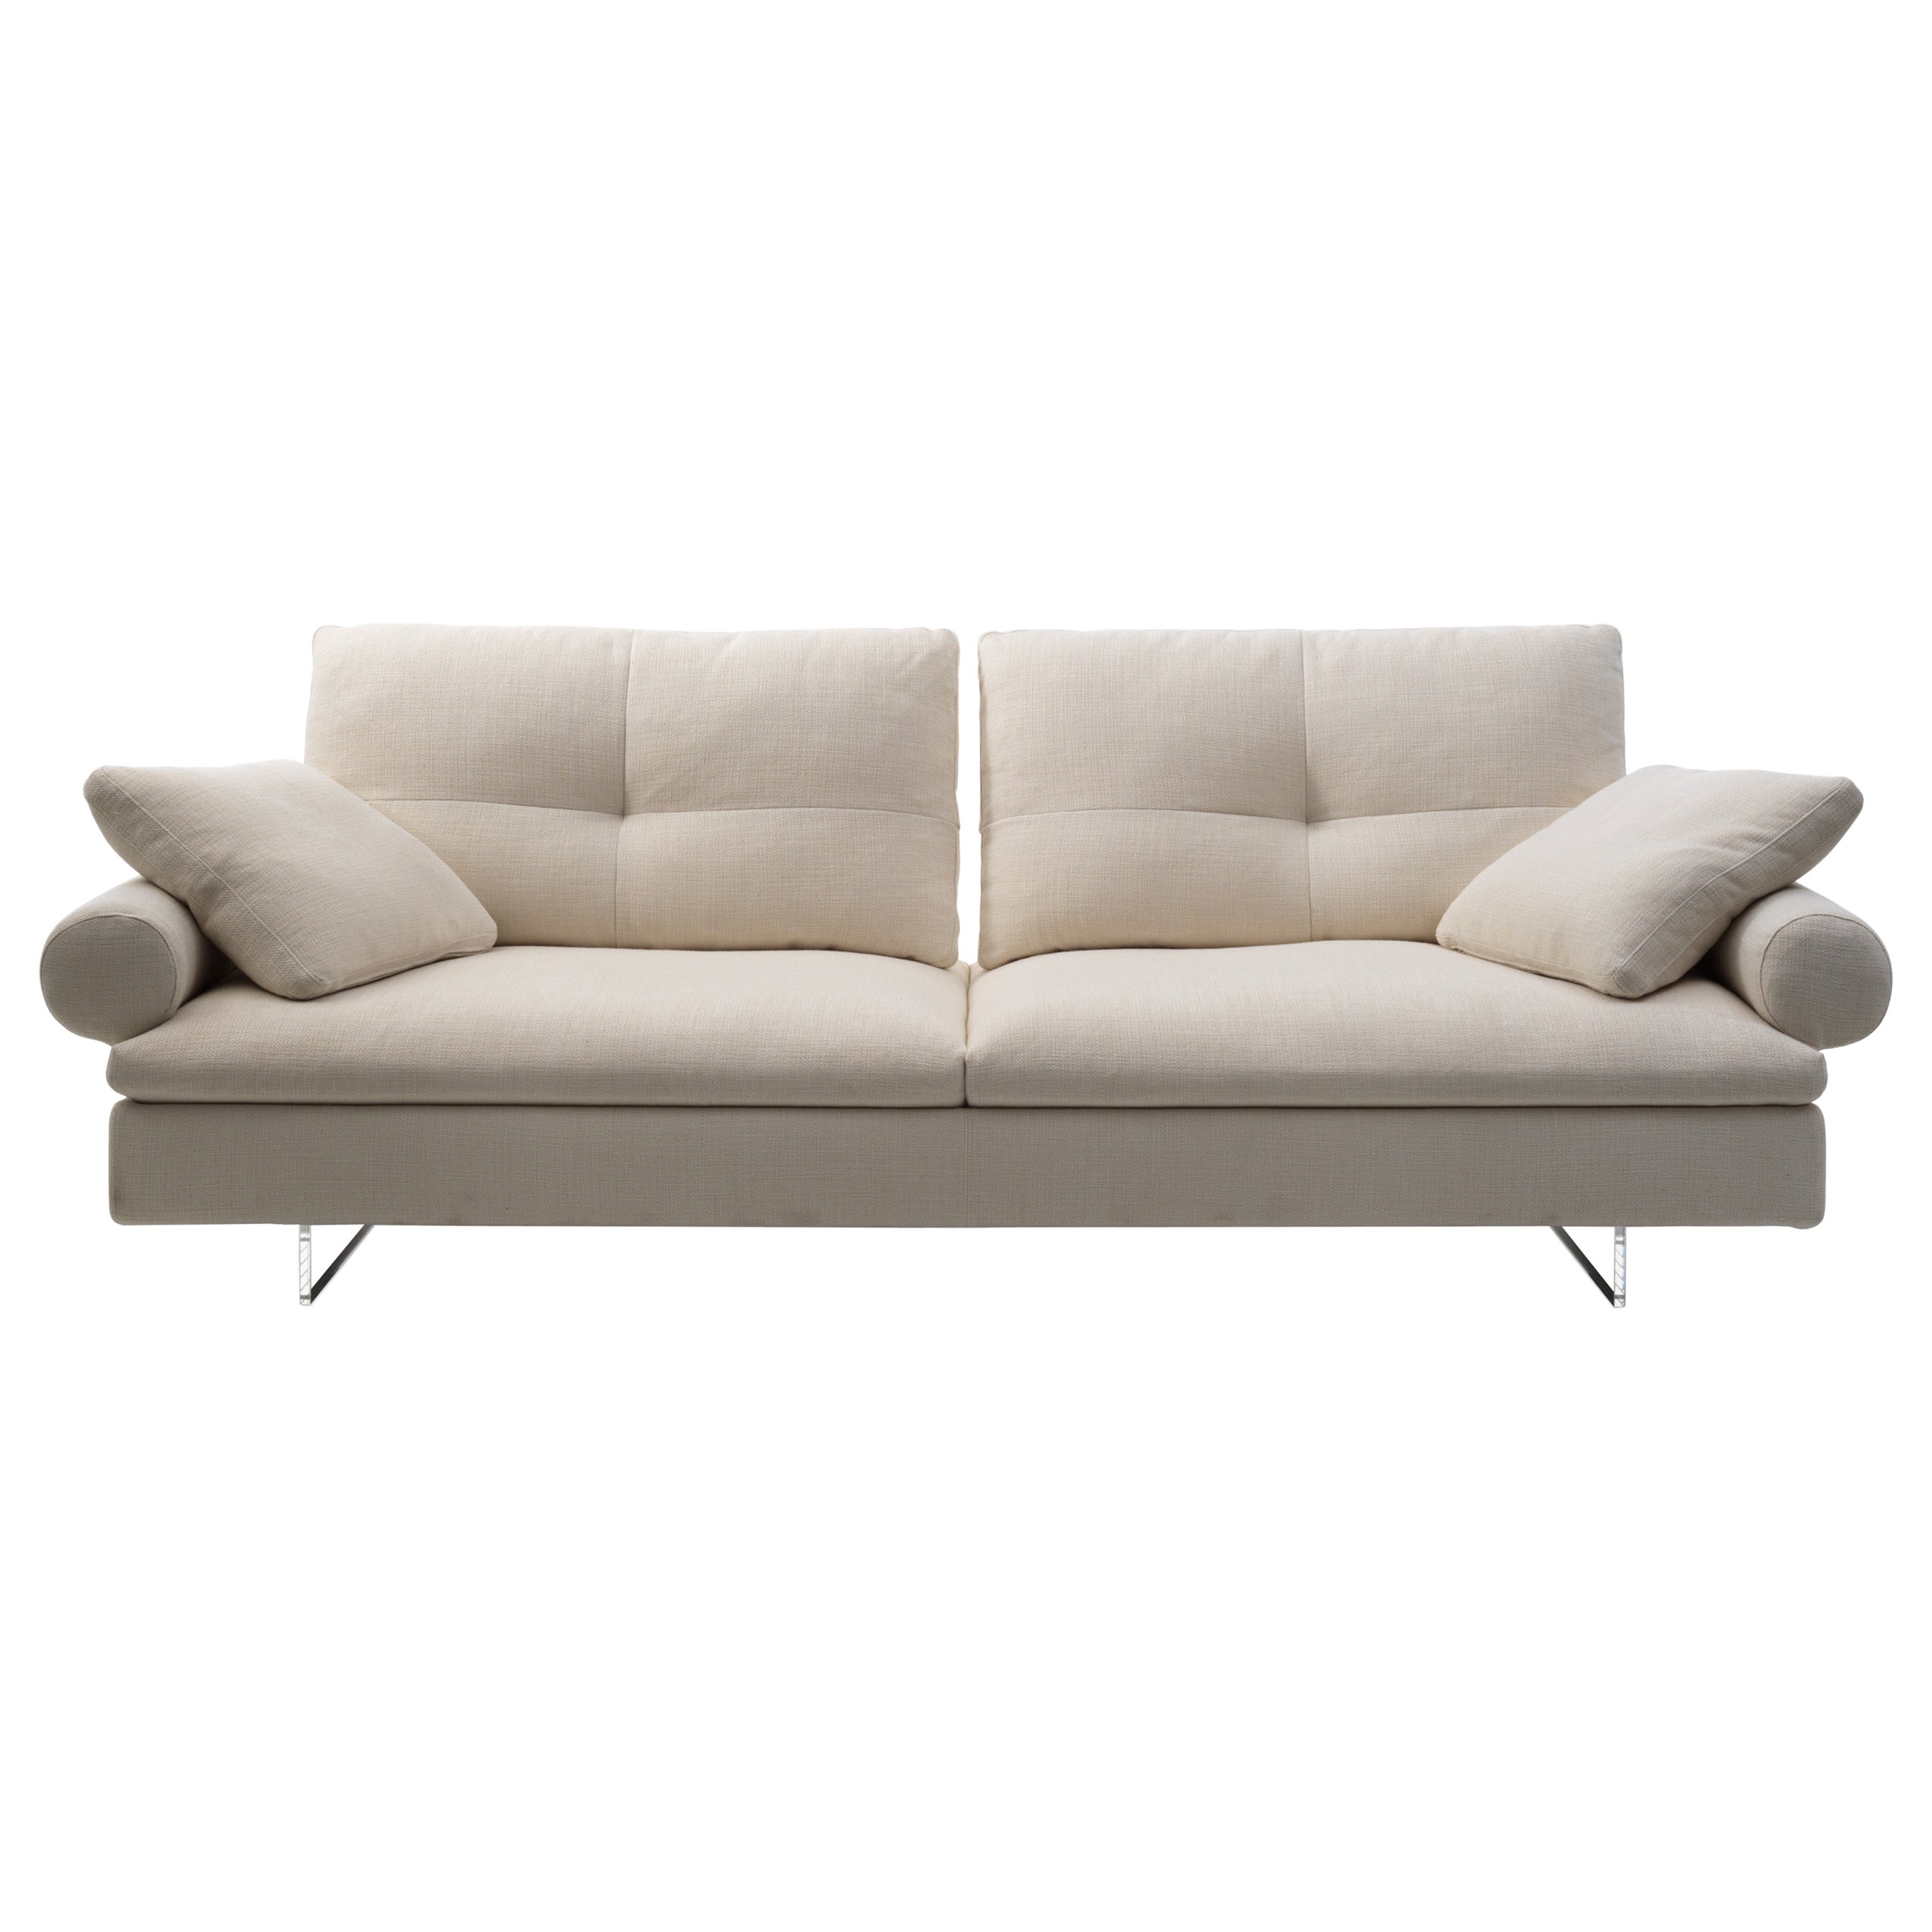 Limes New 88 Small Sofa in Beige Upholstery with Roll Armrest by Sergio Bicego